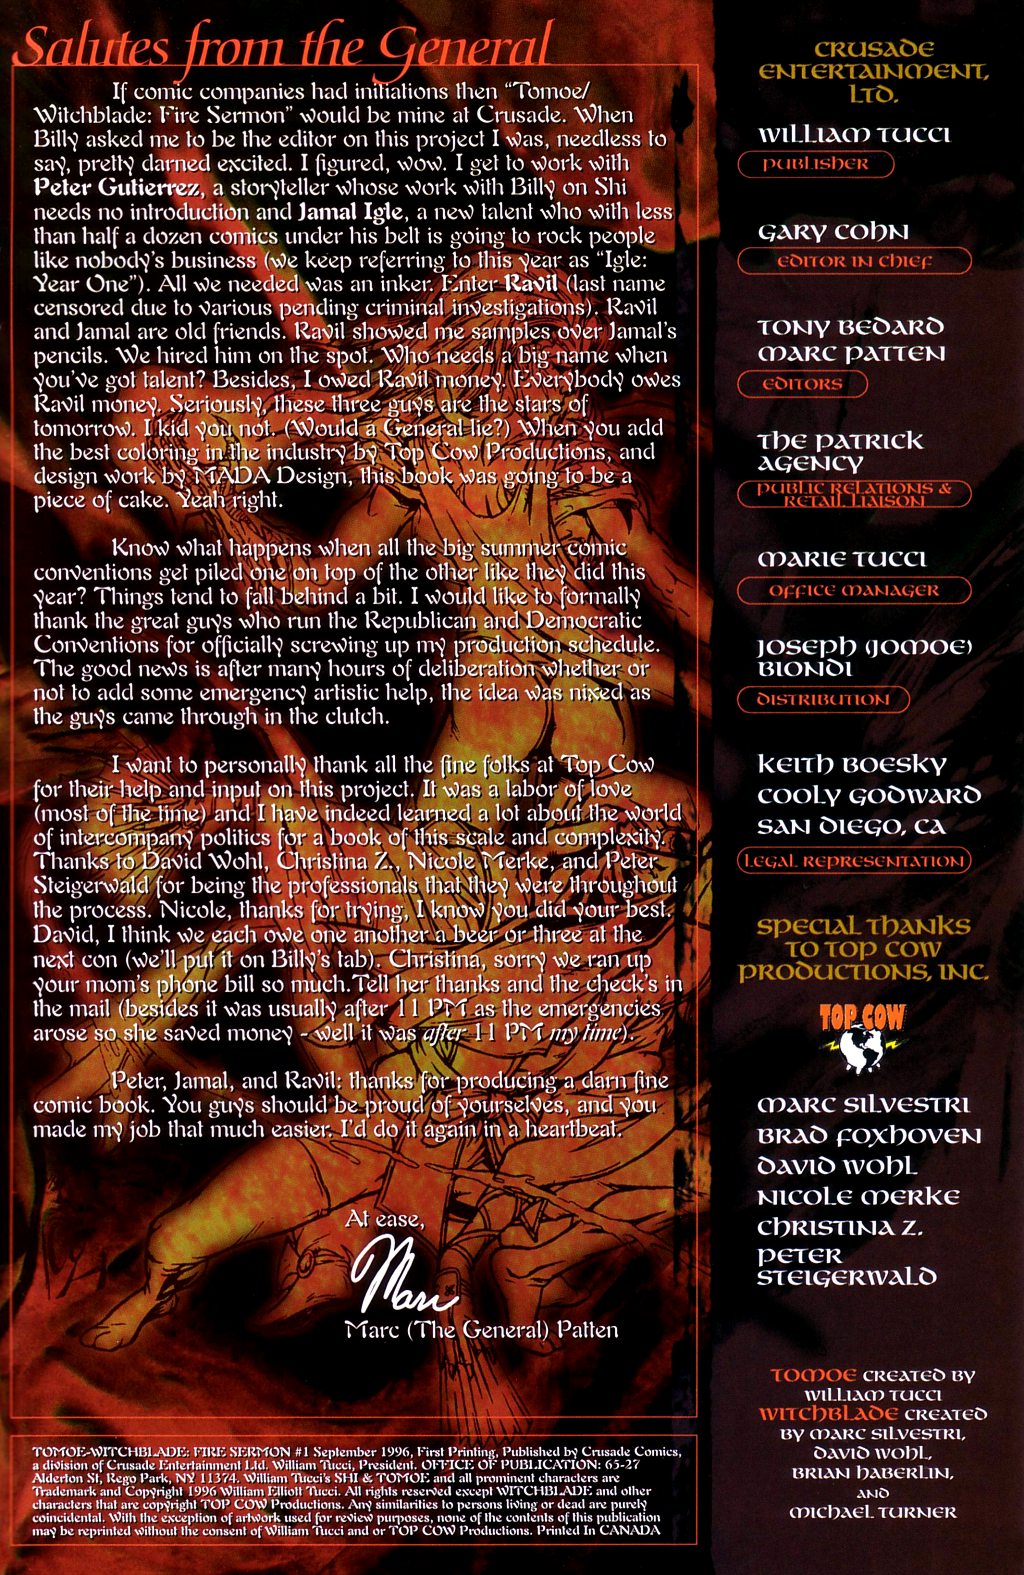 Read online Tomoe/Witchblade: Fire Sermon comic -  Issue # Full - 48